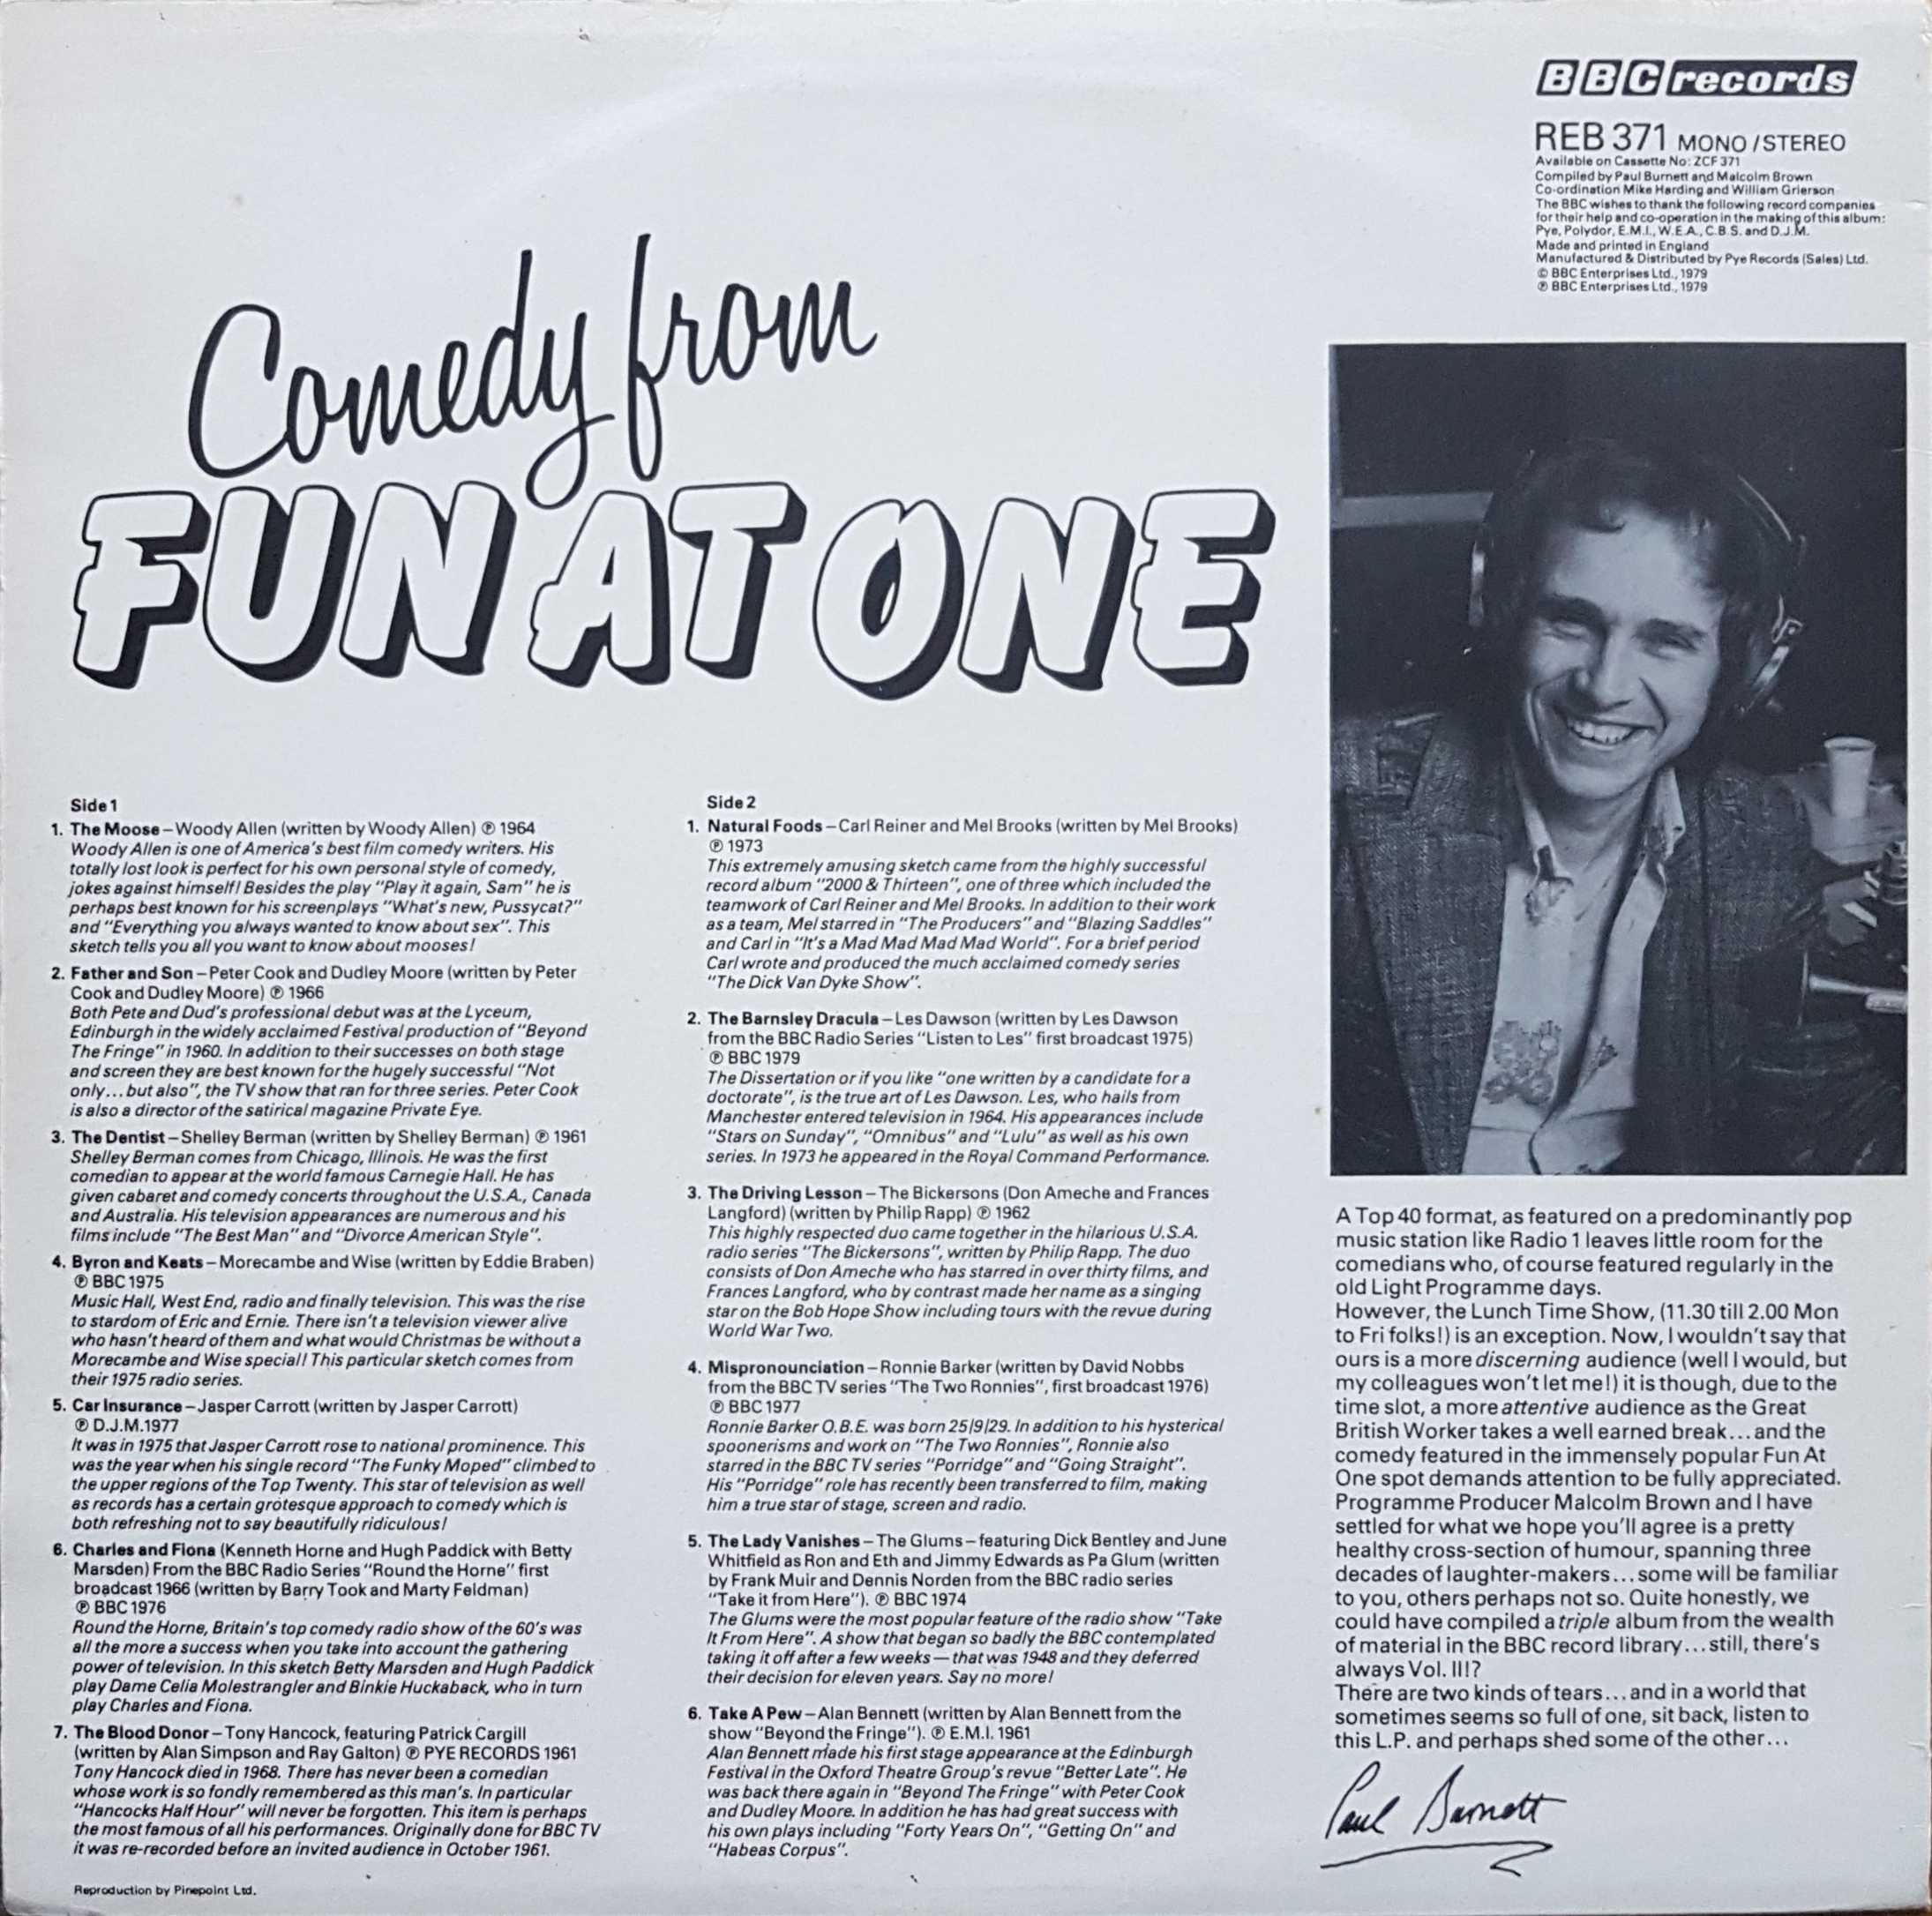 Picture of REB 371 Fun at one by artist Various from the BBC records and Tapes library